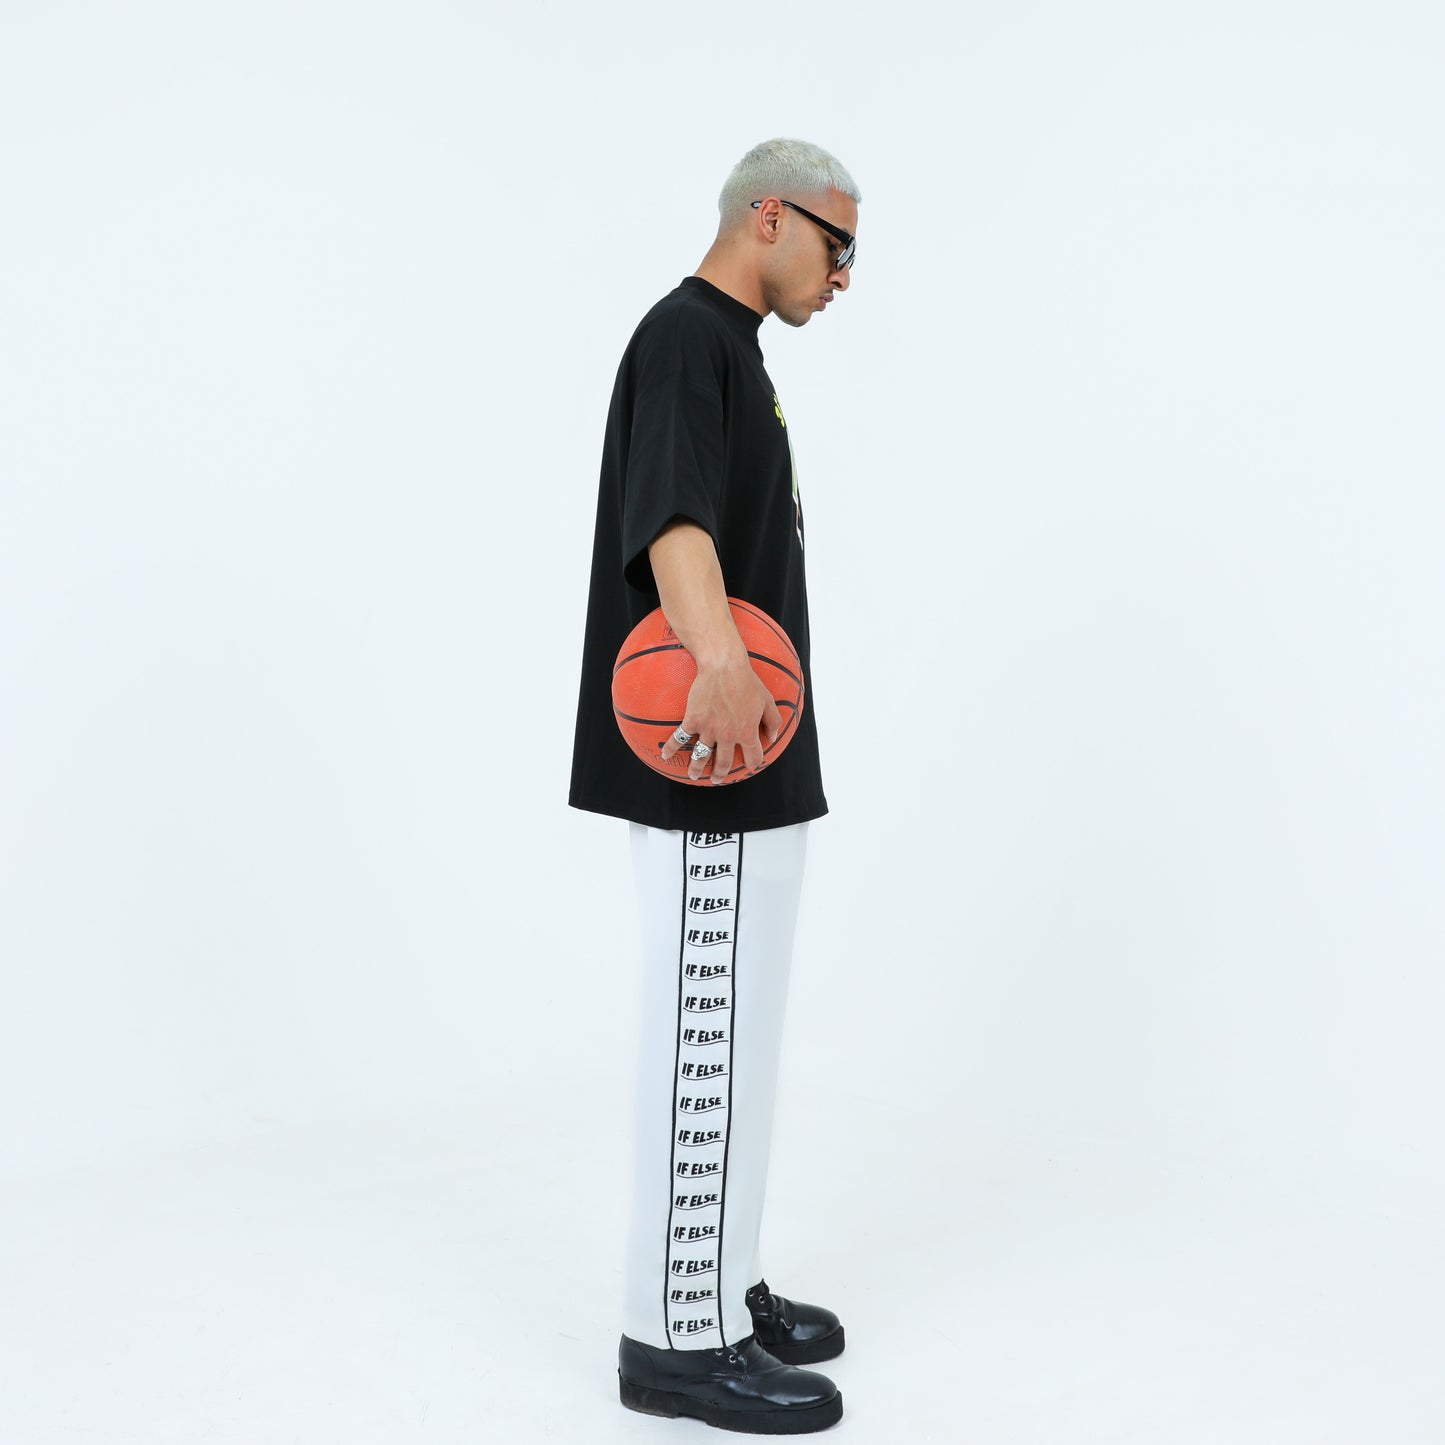 Person wearing a black oversized t-shirt and printed pants, standing sideways holding a basketball.